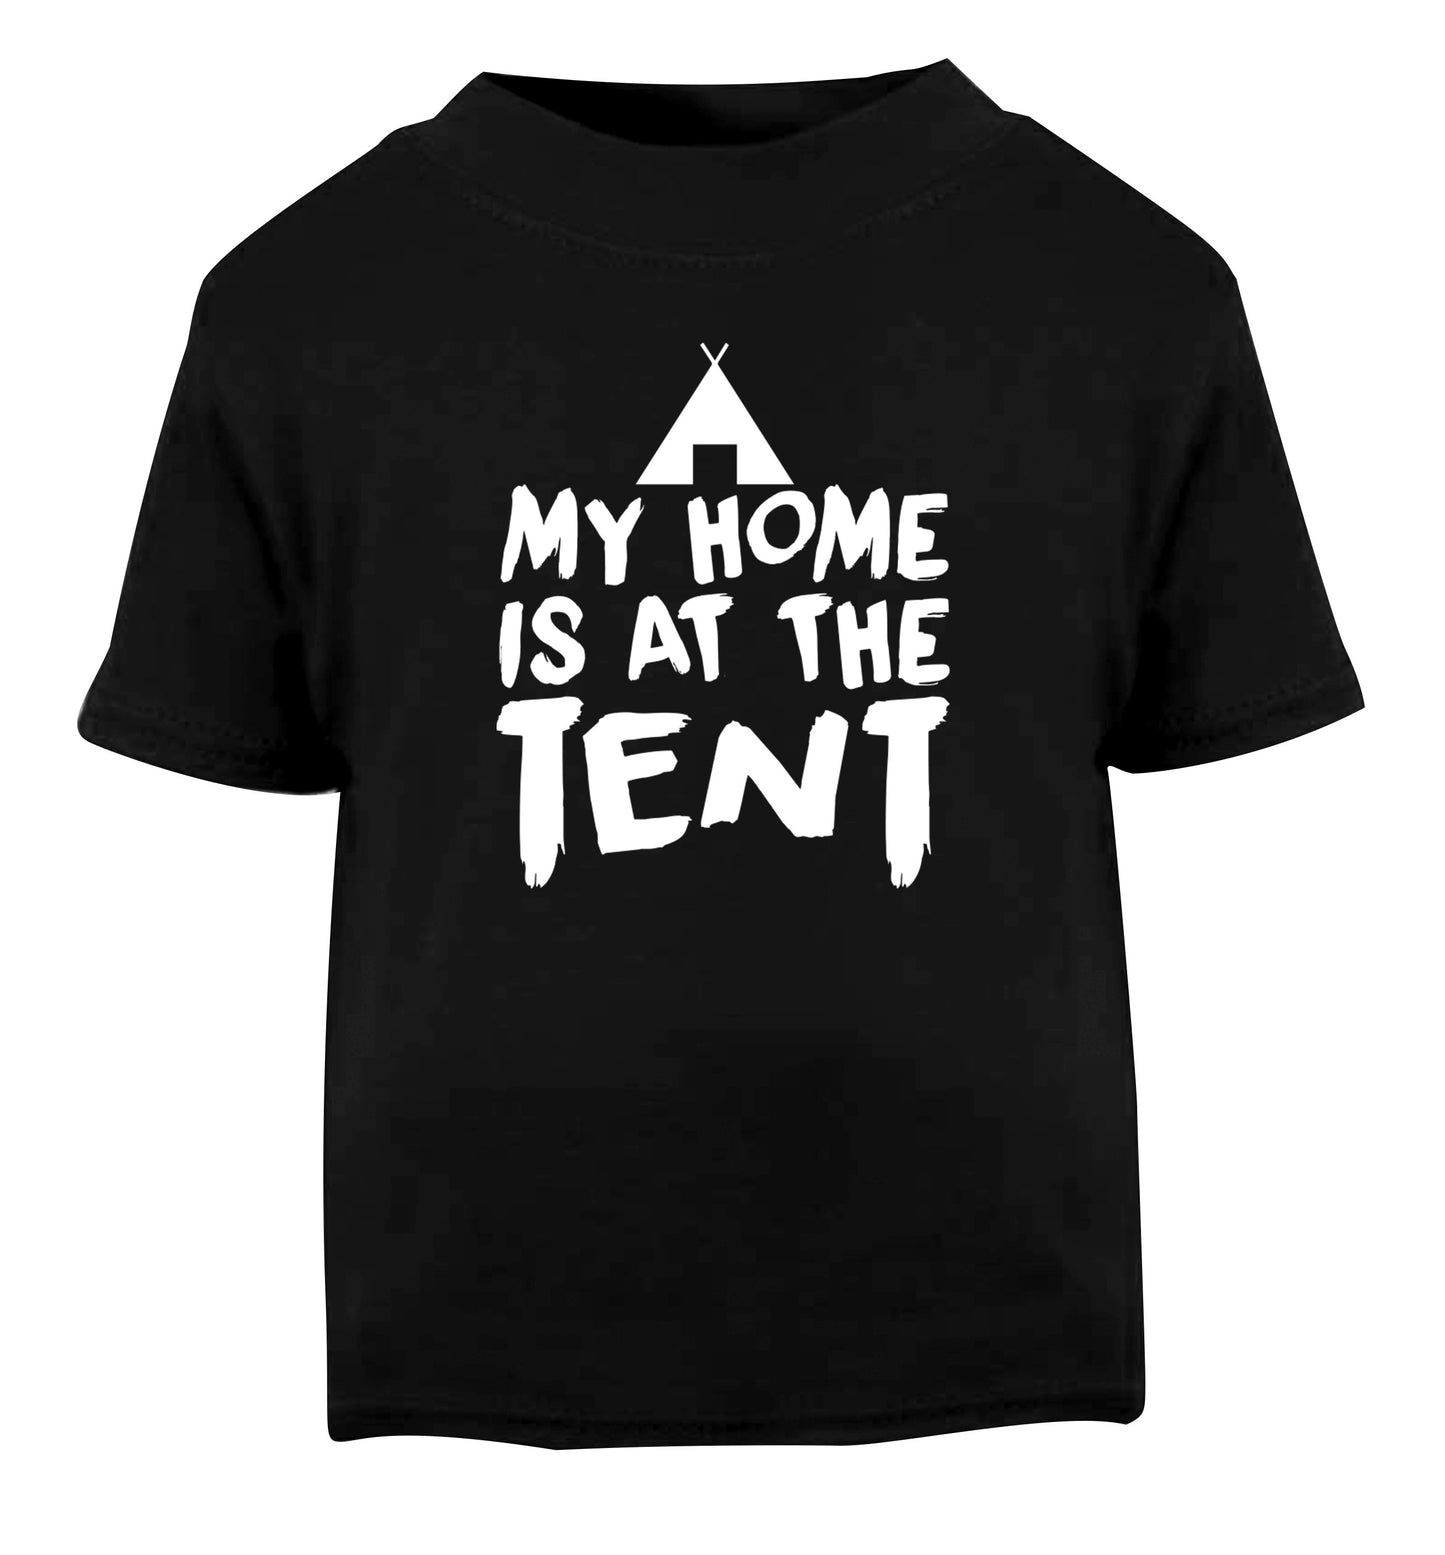 My home is at the tent Black Baby Toddler Tshirt 2 years